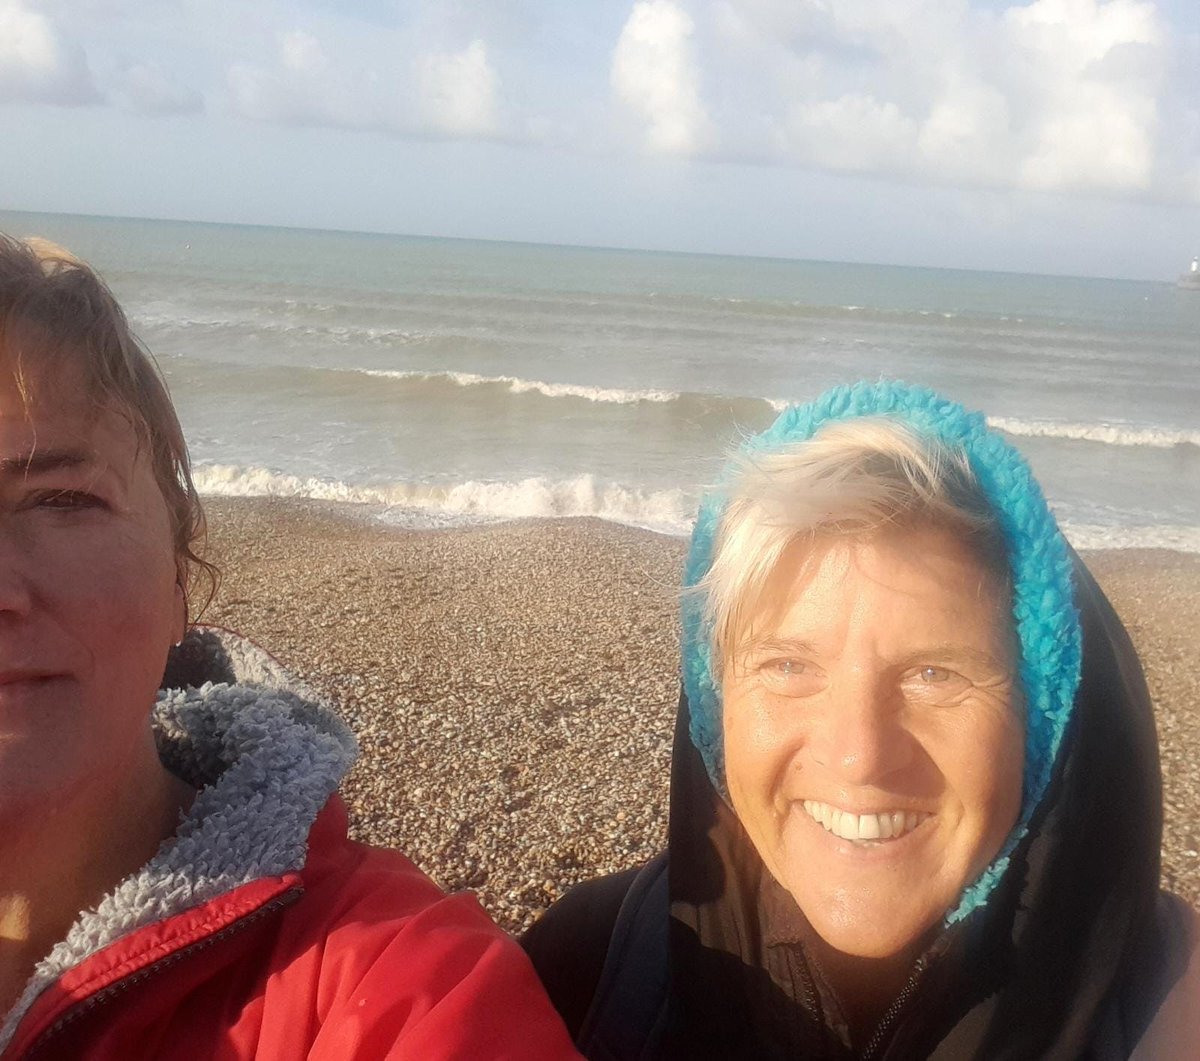 Sublime surfy swims @purplepuffin #seaford #newhaven #seaswimming #openwater #swimsafe #dryrobeterritory